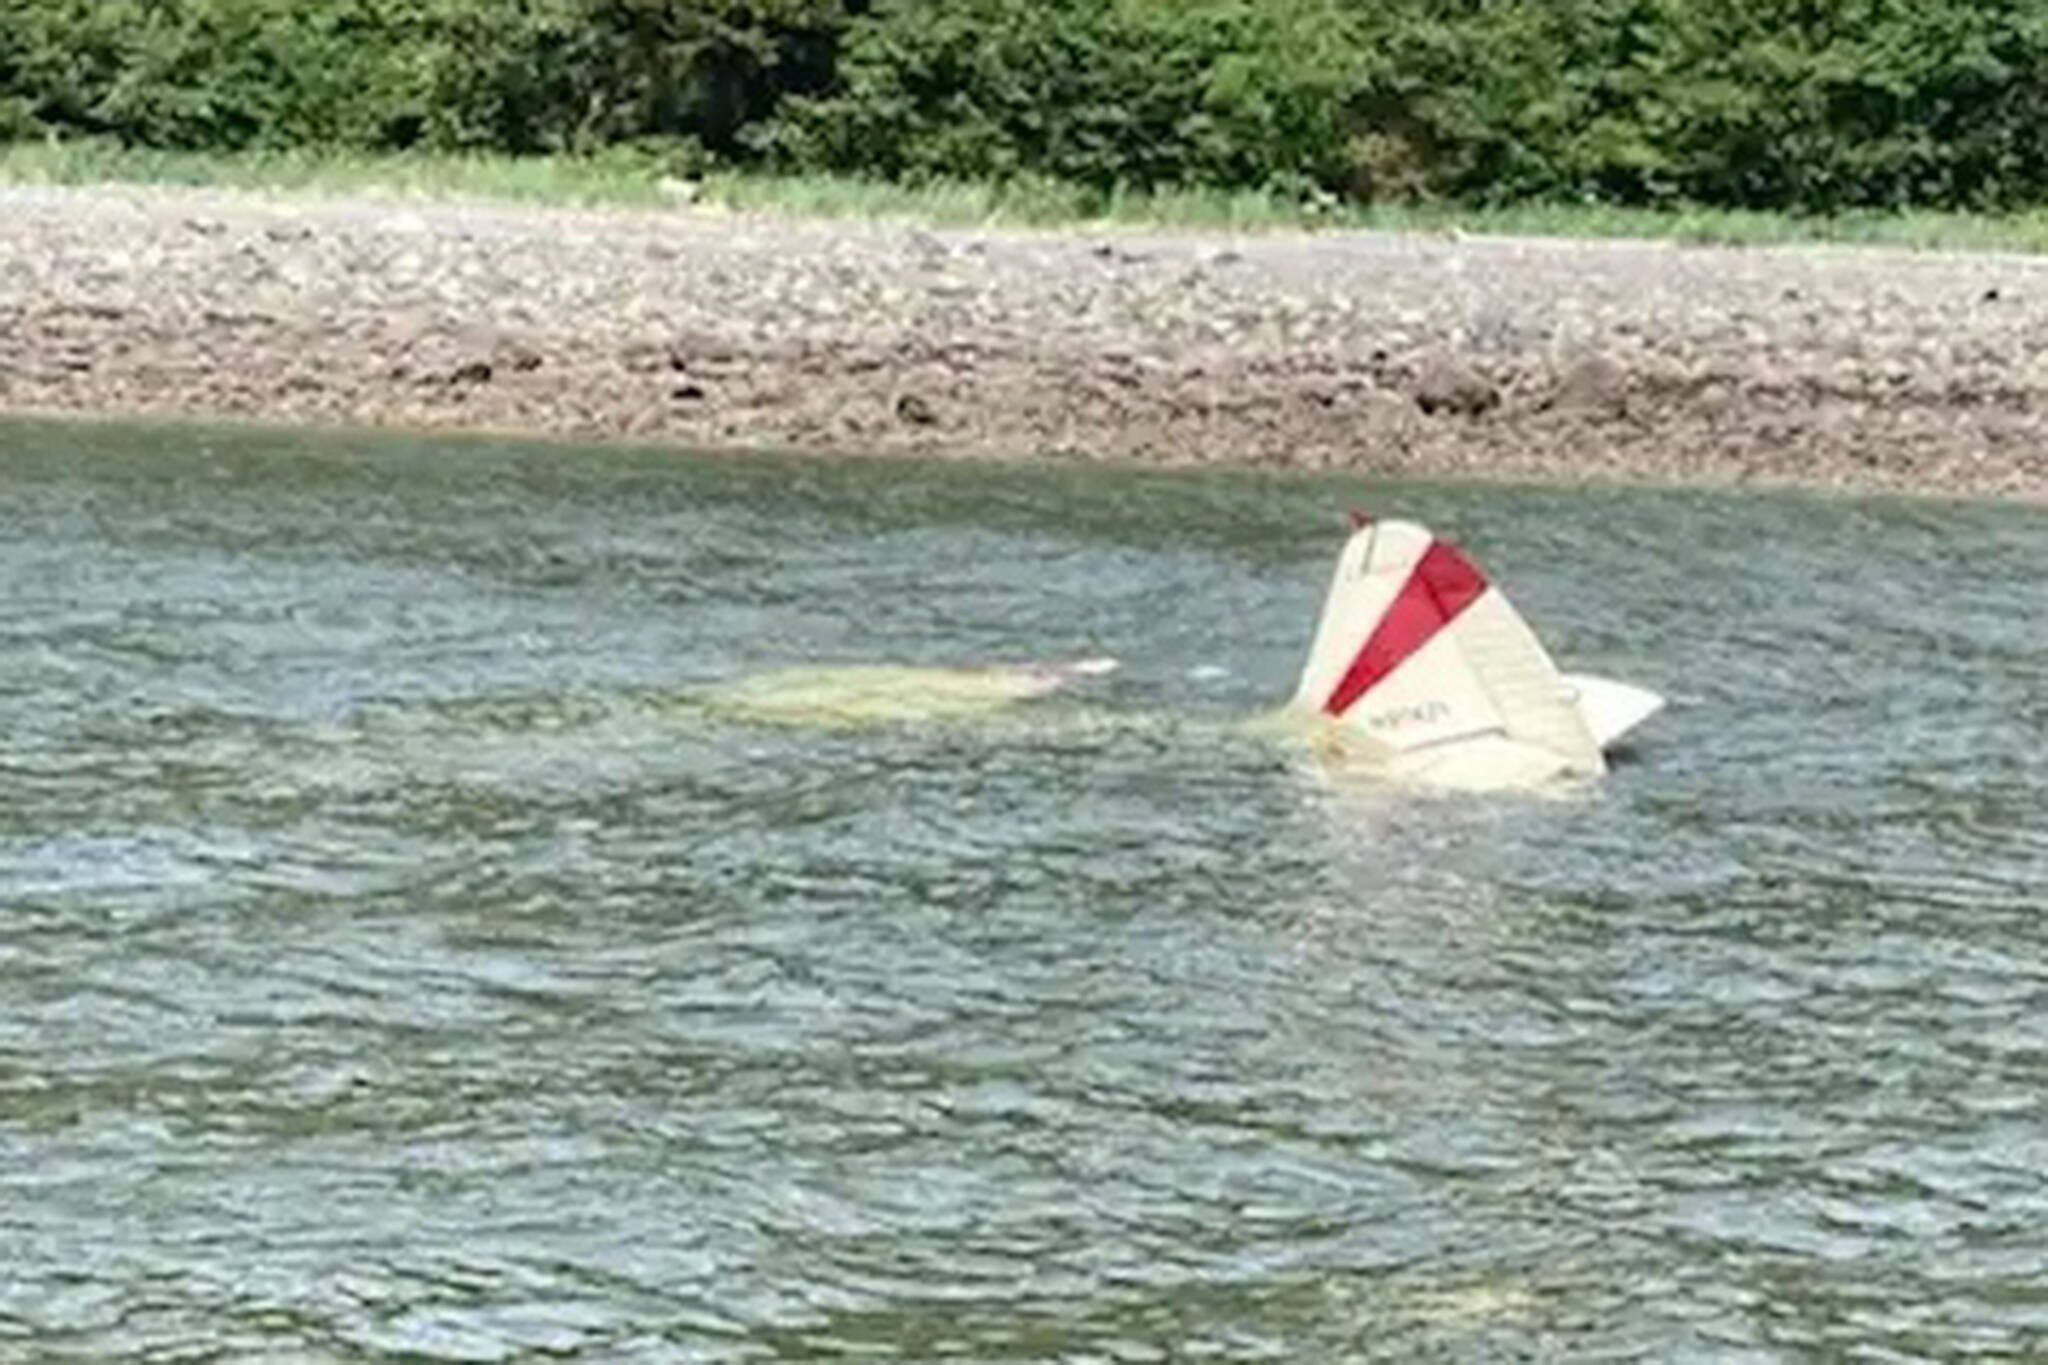 The Coast Guard medevaced two people from shore after their plane crashed in the water near Outer Point on Douglas Island, Alaska, June 7, 2022. The two survivors immediately swam ashore after their plane crashed approximately 100 feet from shore. (Courtesy Photo / Coast Guard)